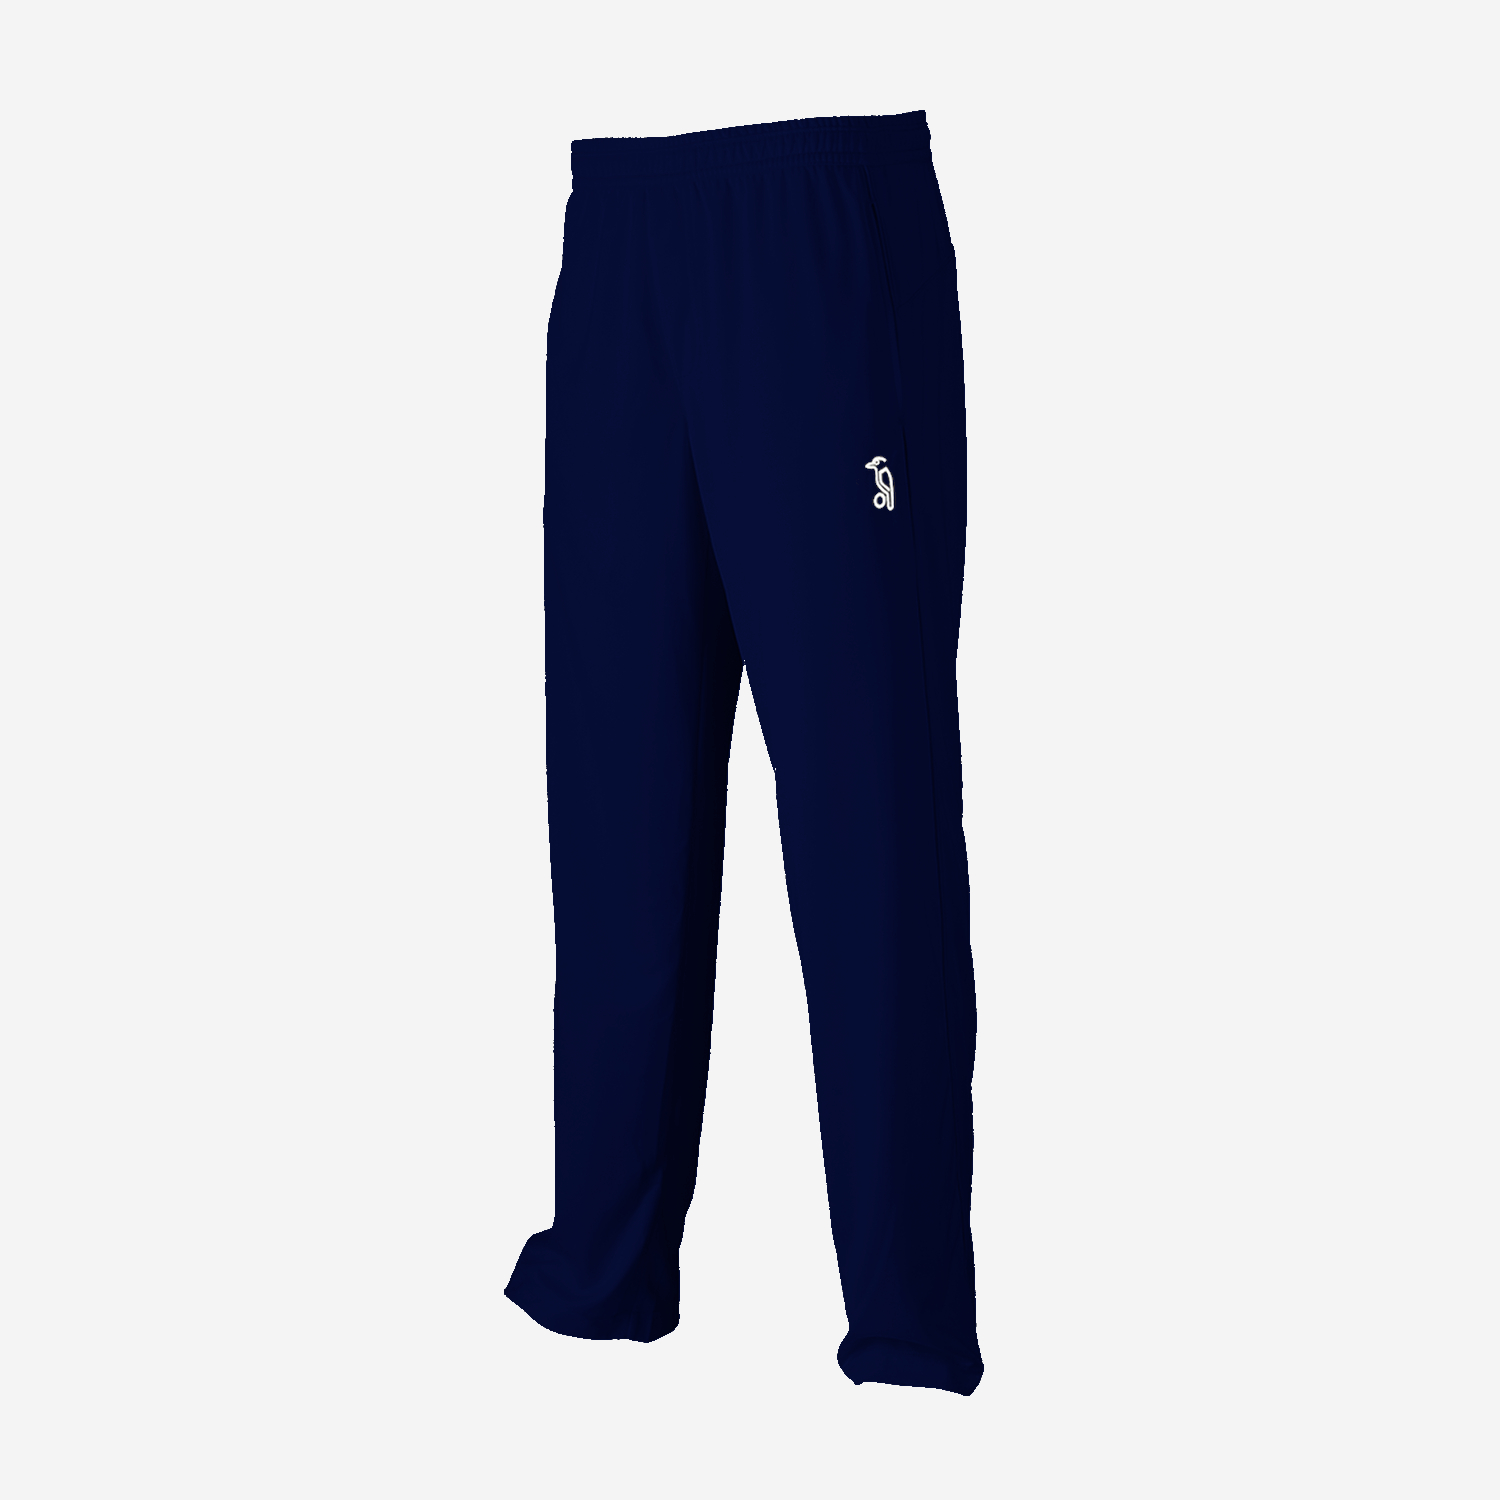 QEGS Cricket Trousers - QEGS